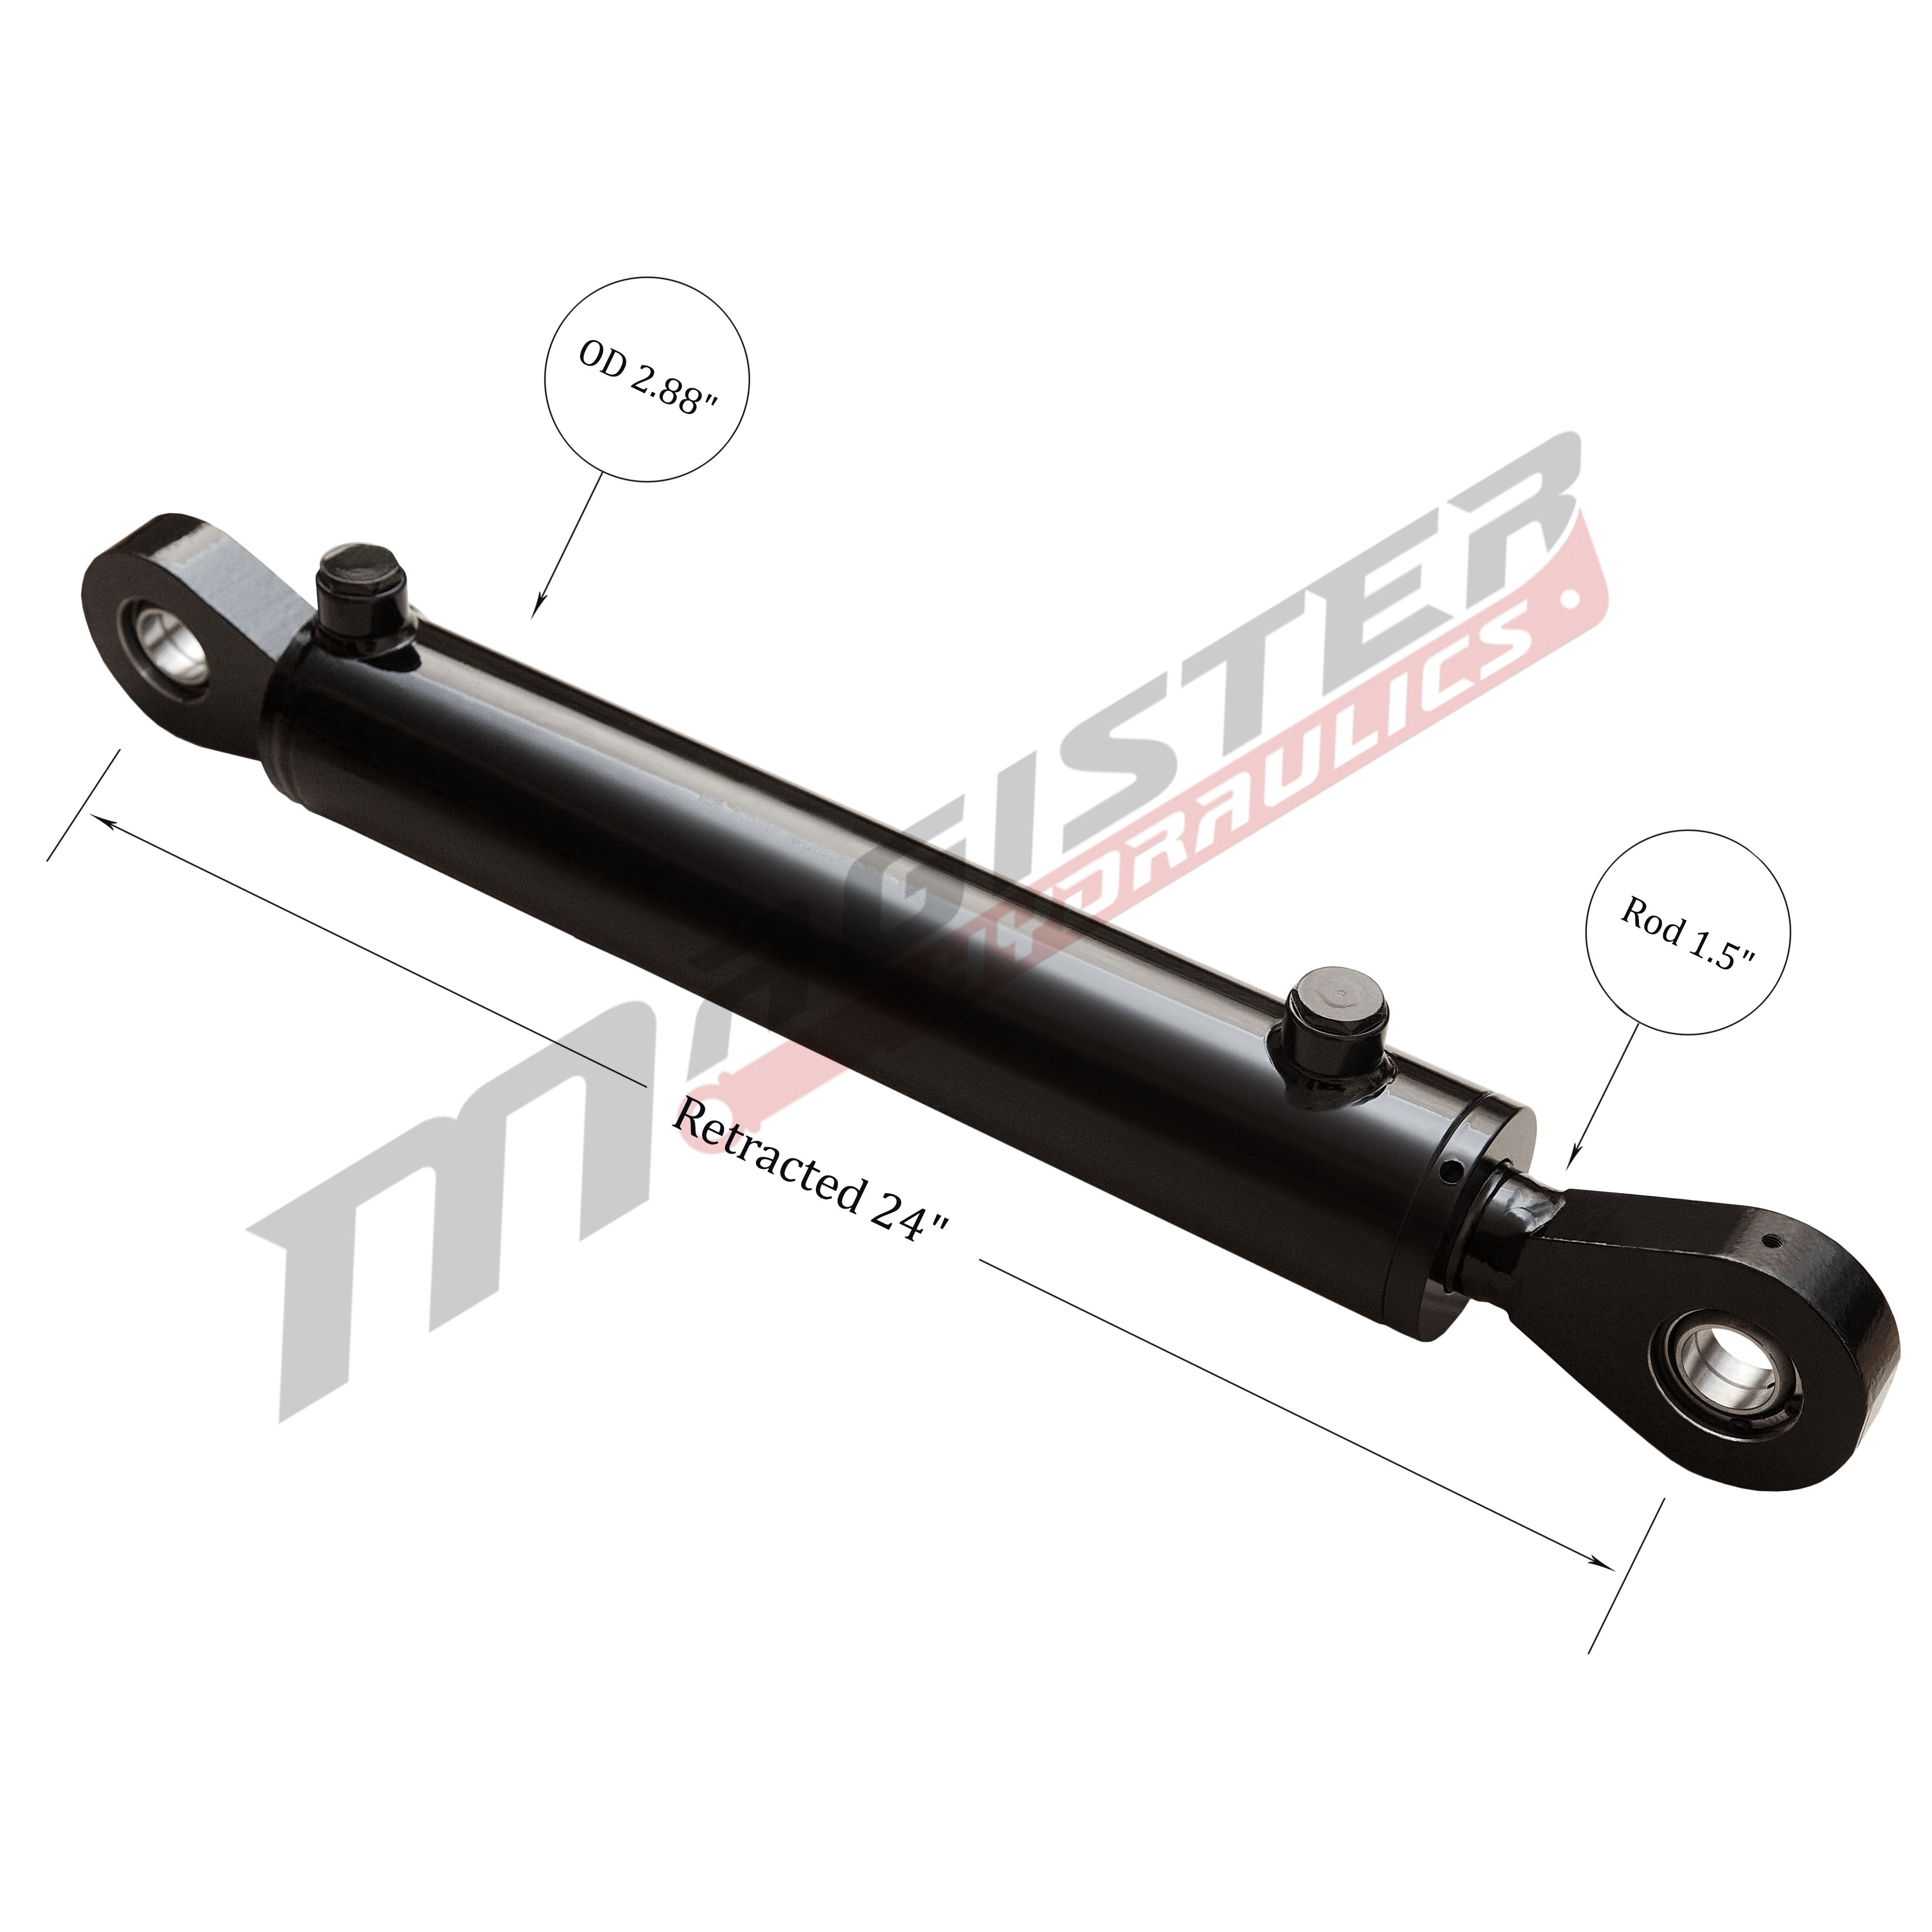 2.5 bore x 14 stroke hydraulic cylinder, welded swivel eye double acting cylinder | Magister Hydraulics